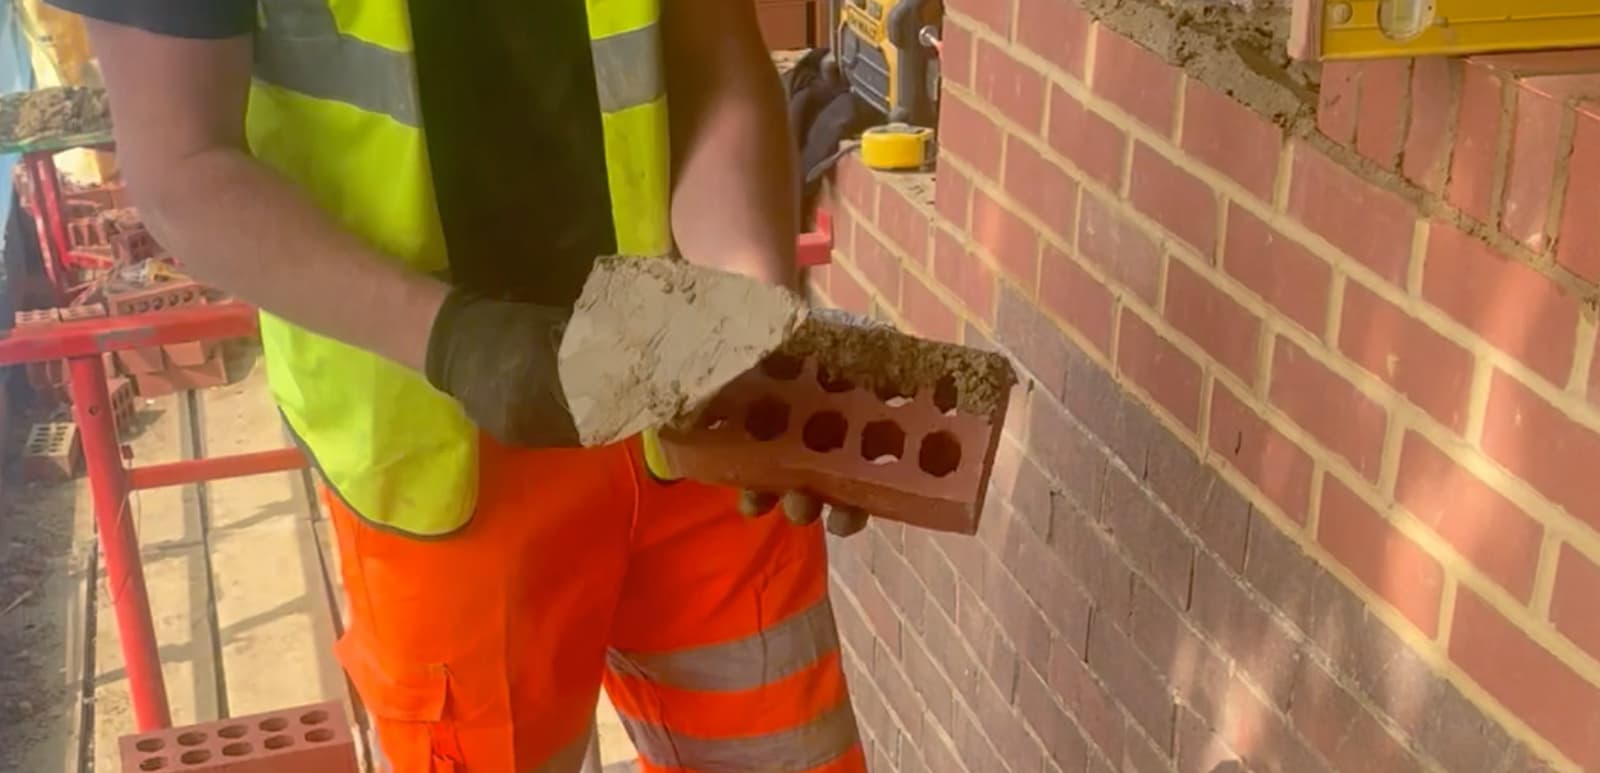 Join the Brickpoint London Team - Brick Restoration and Brick Pointing Experts